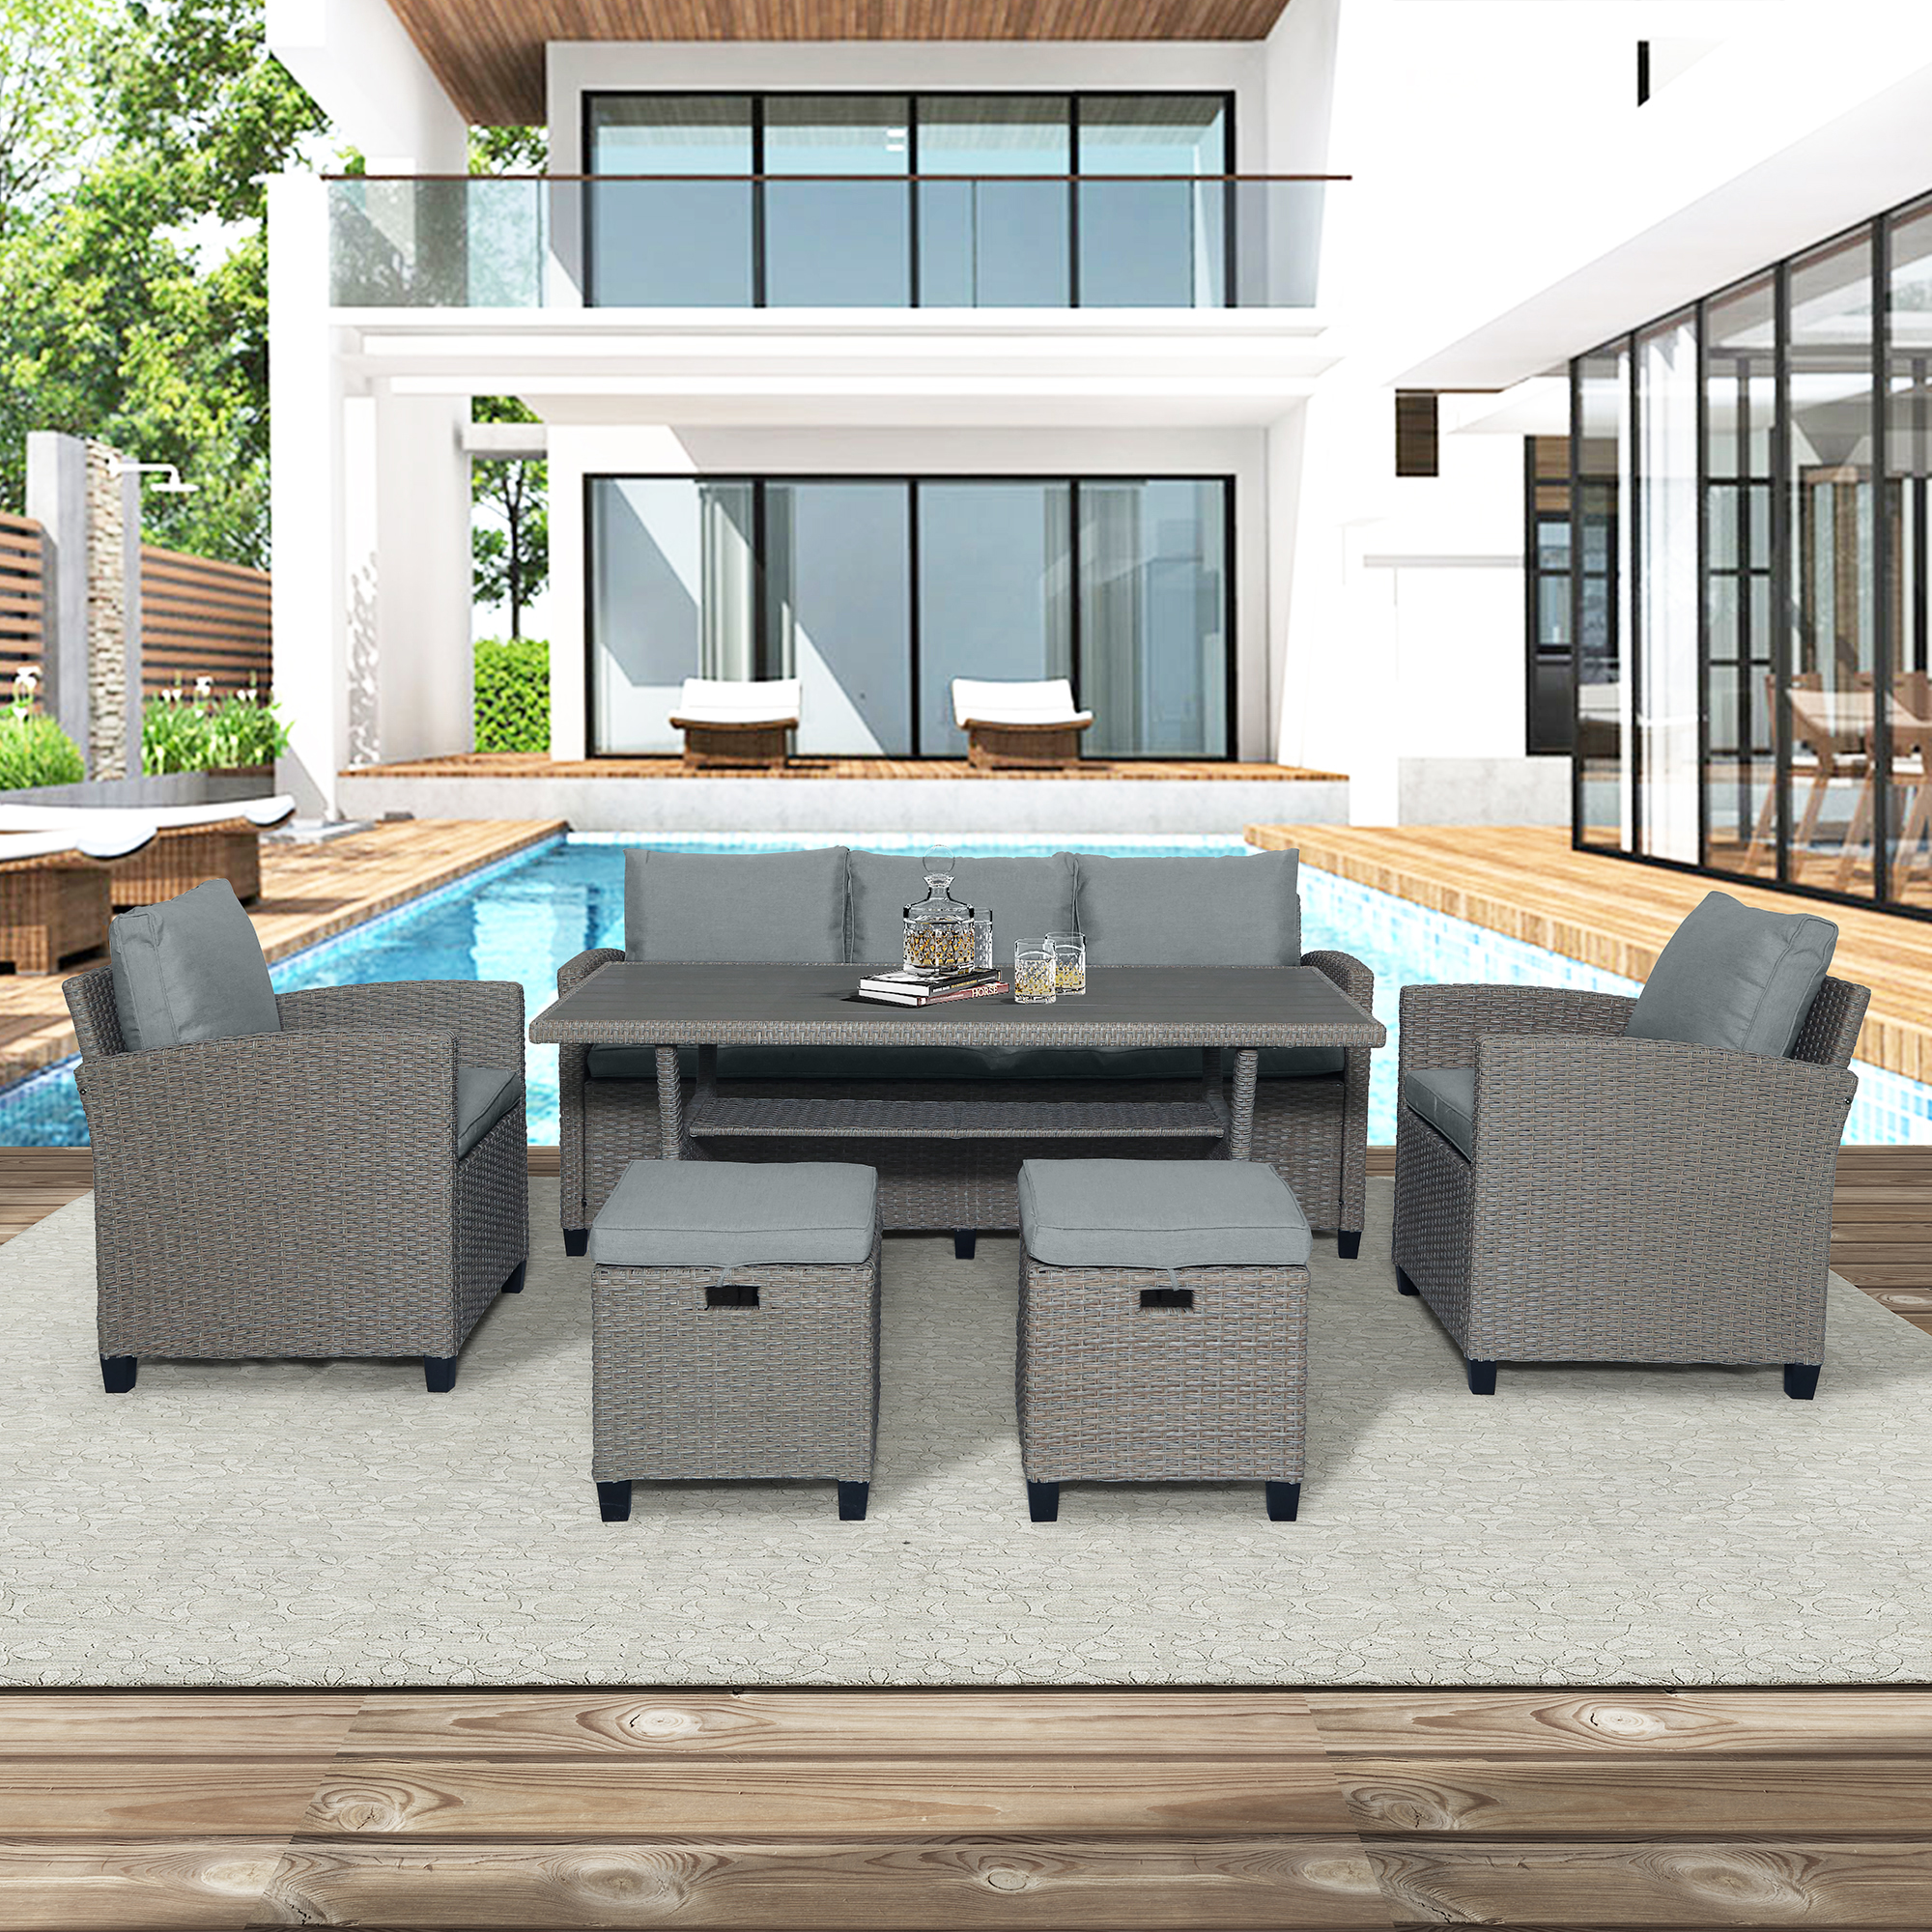 6 Pieces Outdoor Dining Sets, Sectional Sofa Patio Dining Table and Chairs Set, PE Rattan Conversation Set, Gray Wicker Garden Backyard Sectional Sofa - image 3 of 9